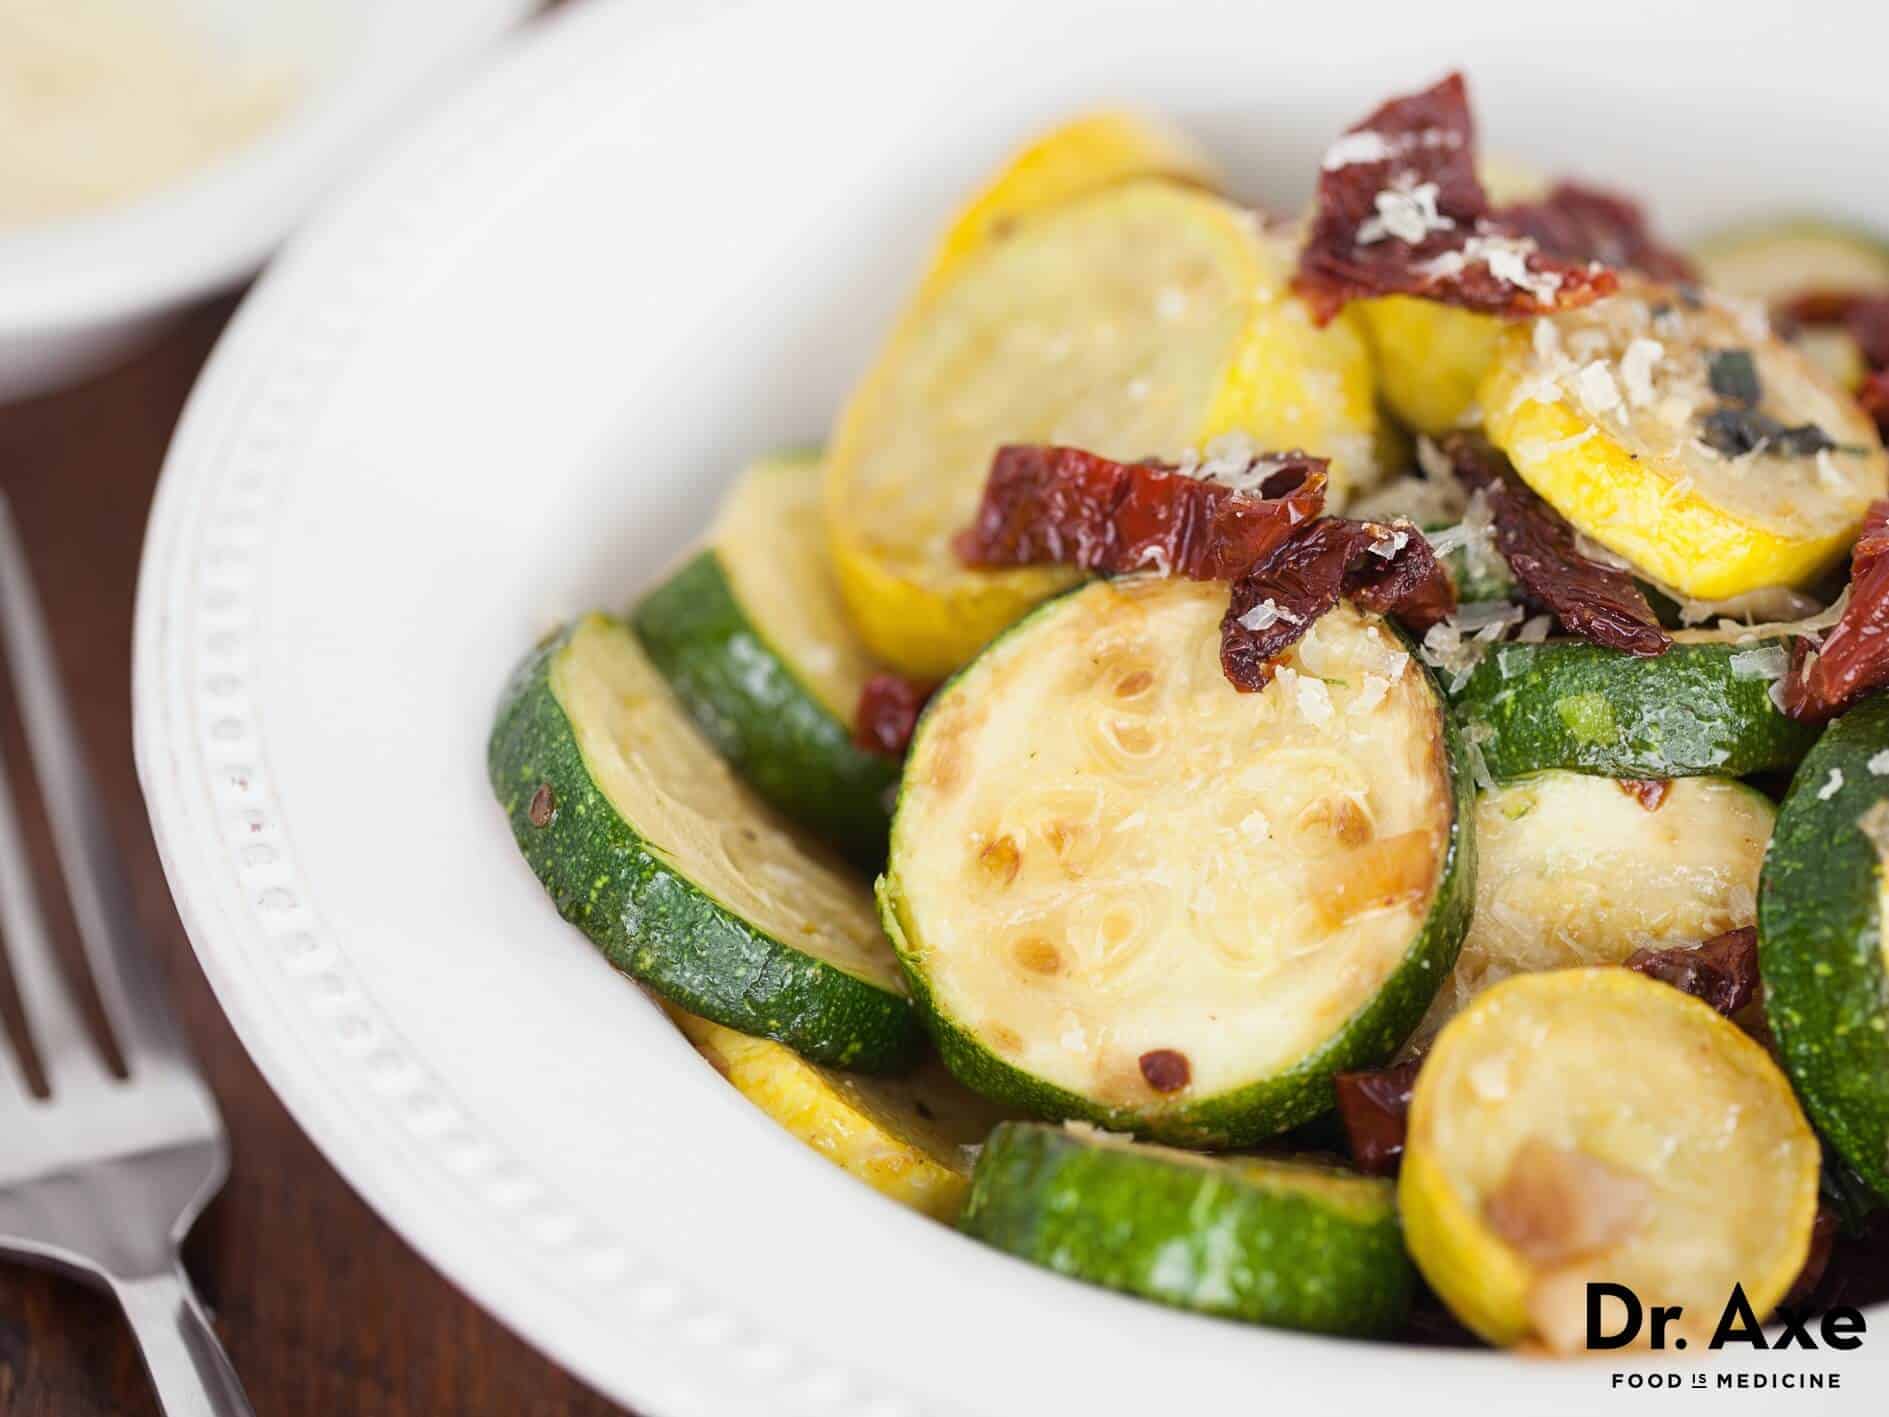 Garden squash with sun-dried tomatoes recipe - Dr. Axe